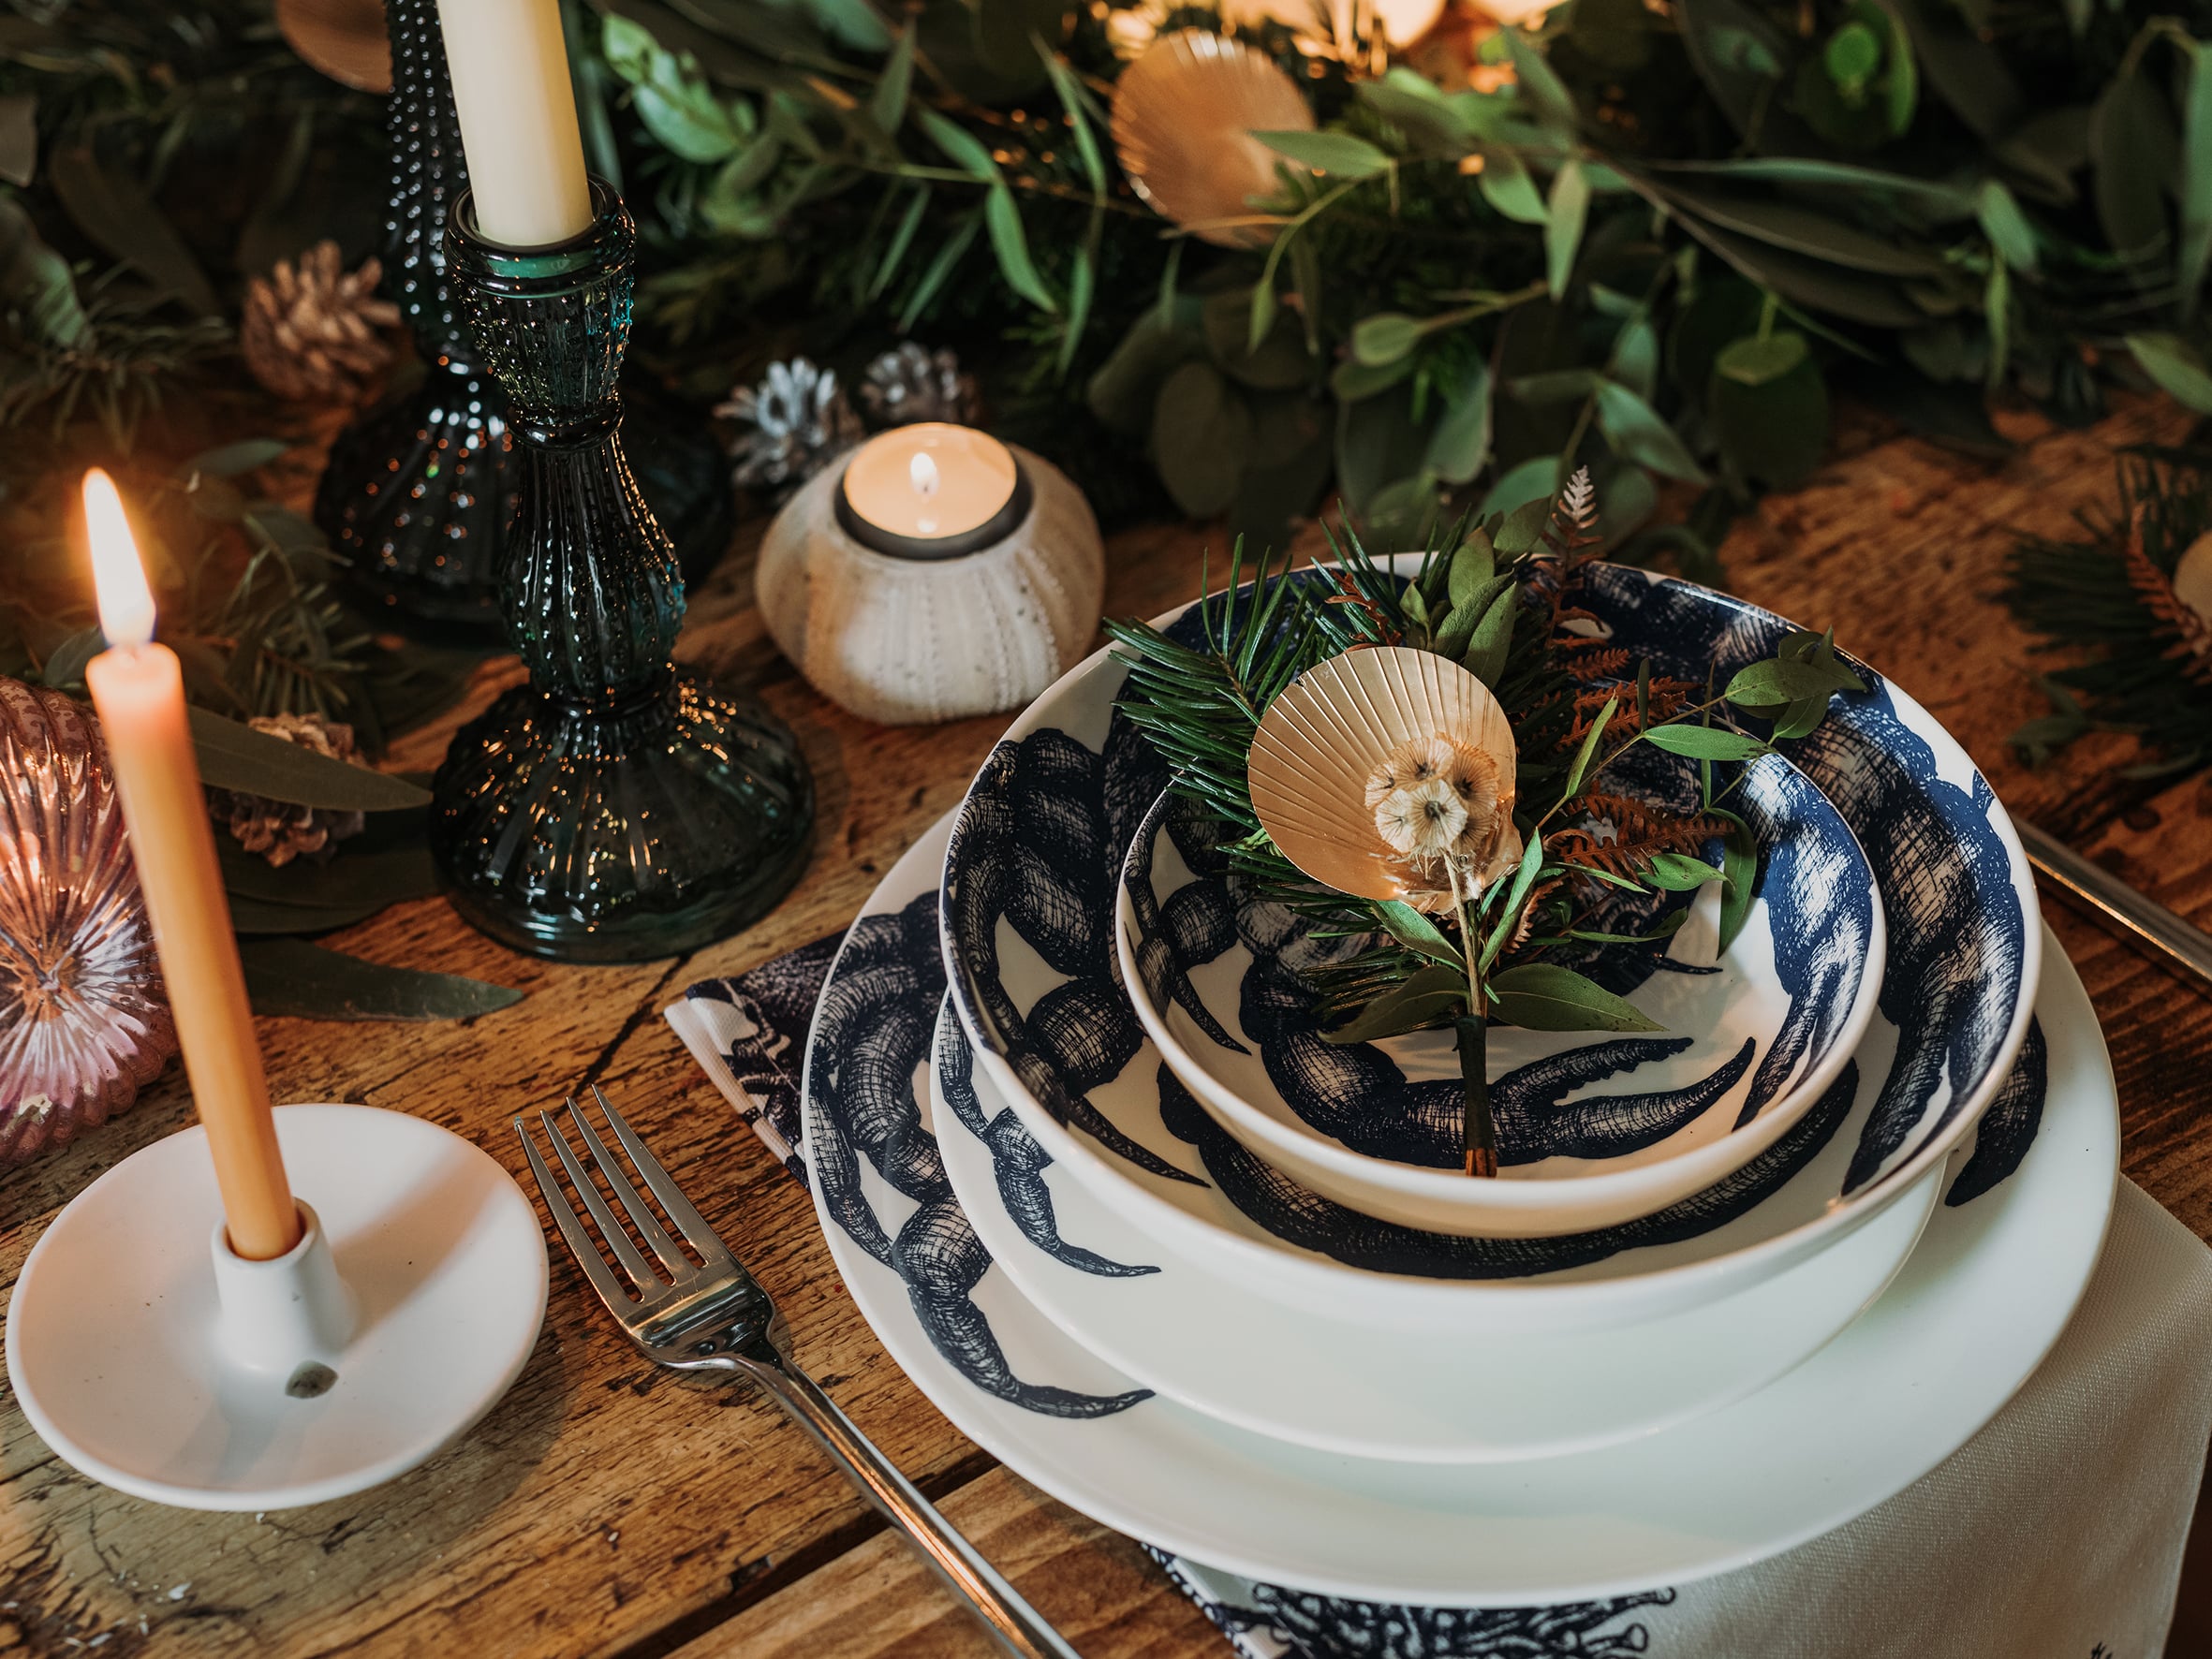 Pasta bowl in Bone China in our Classic range in Navy and white in the Crab design,placed on a Crab dinner plate and has a smaller bowl placed inside.All are on a table setting and the table is decorated with foliage and candle holders